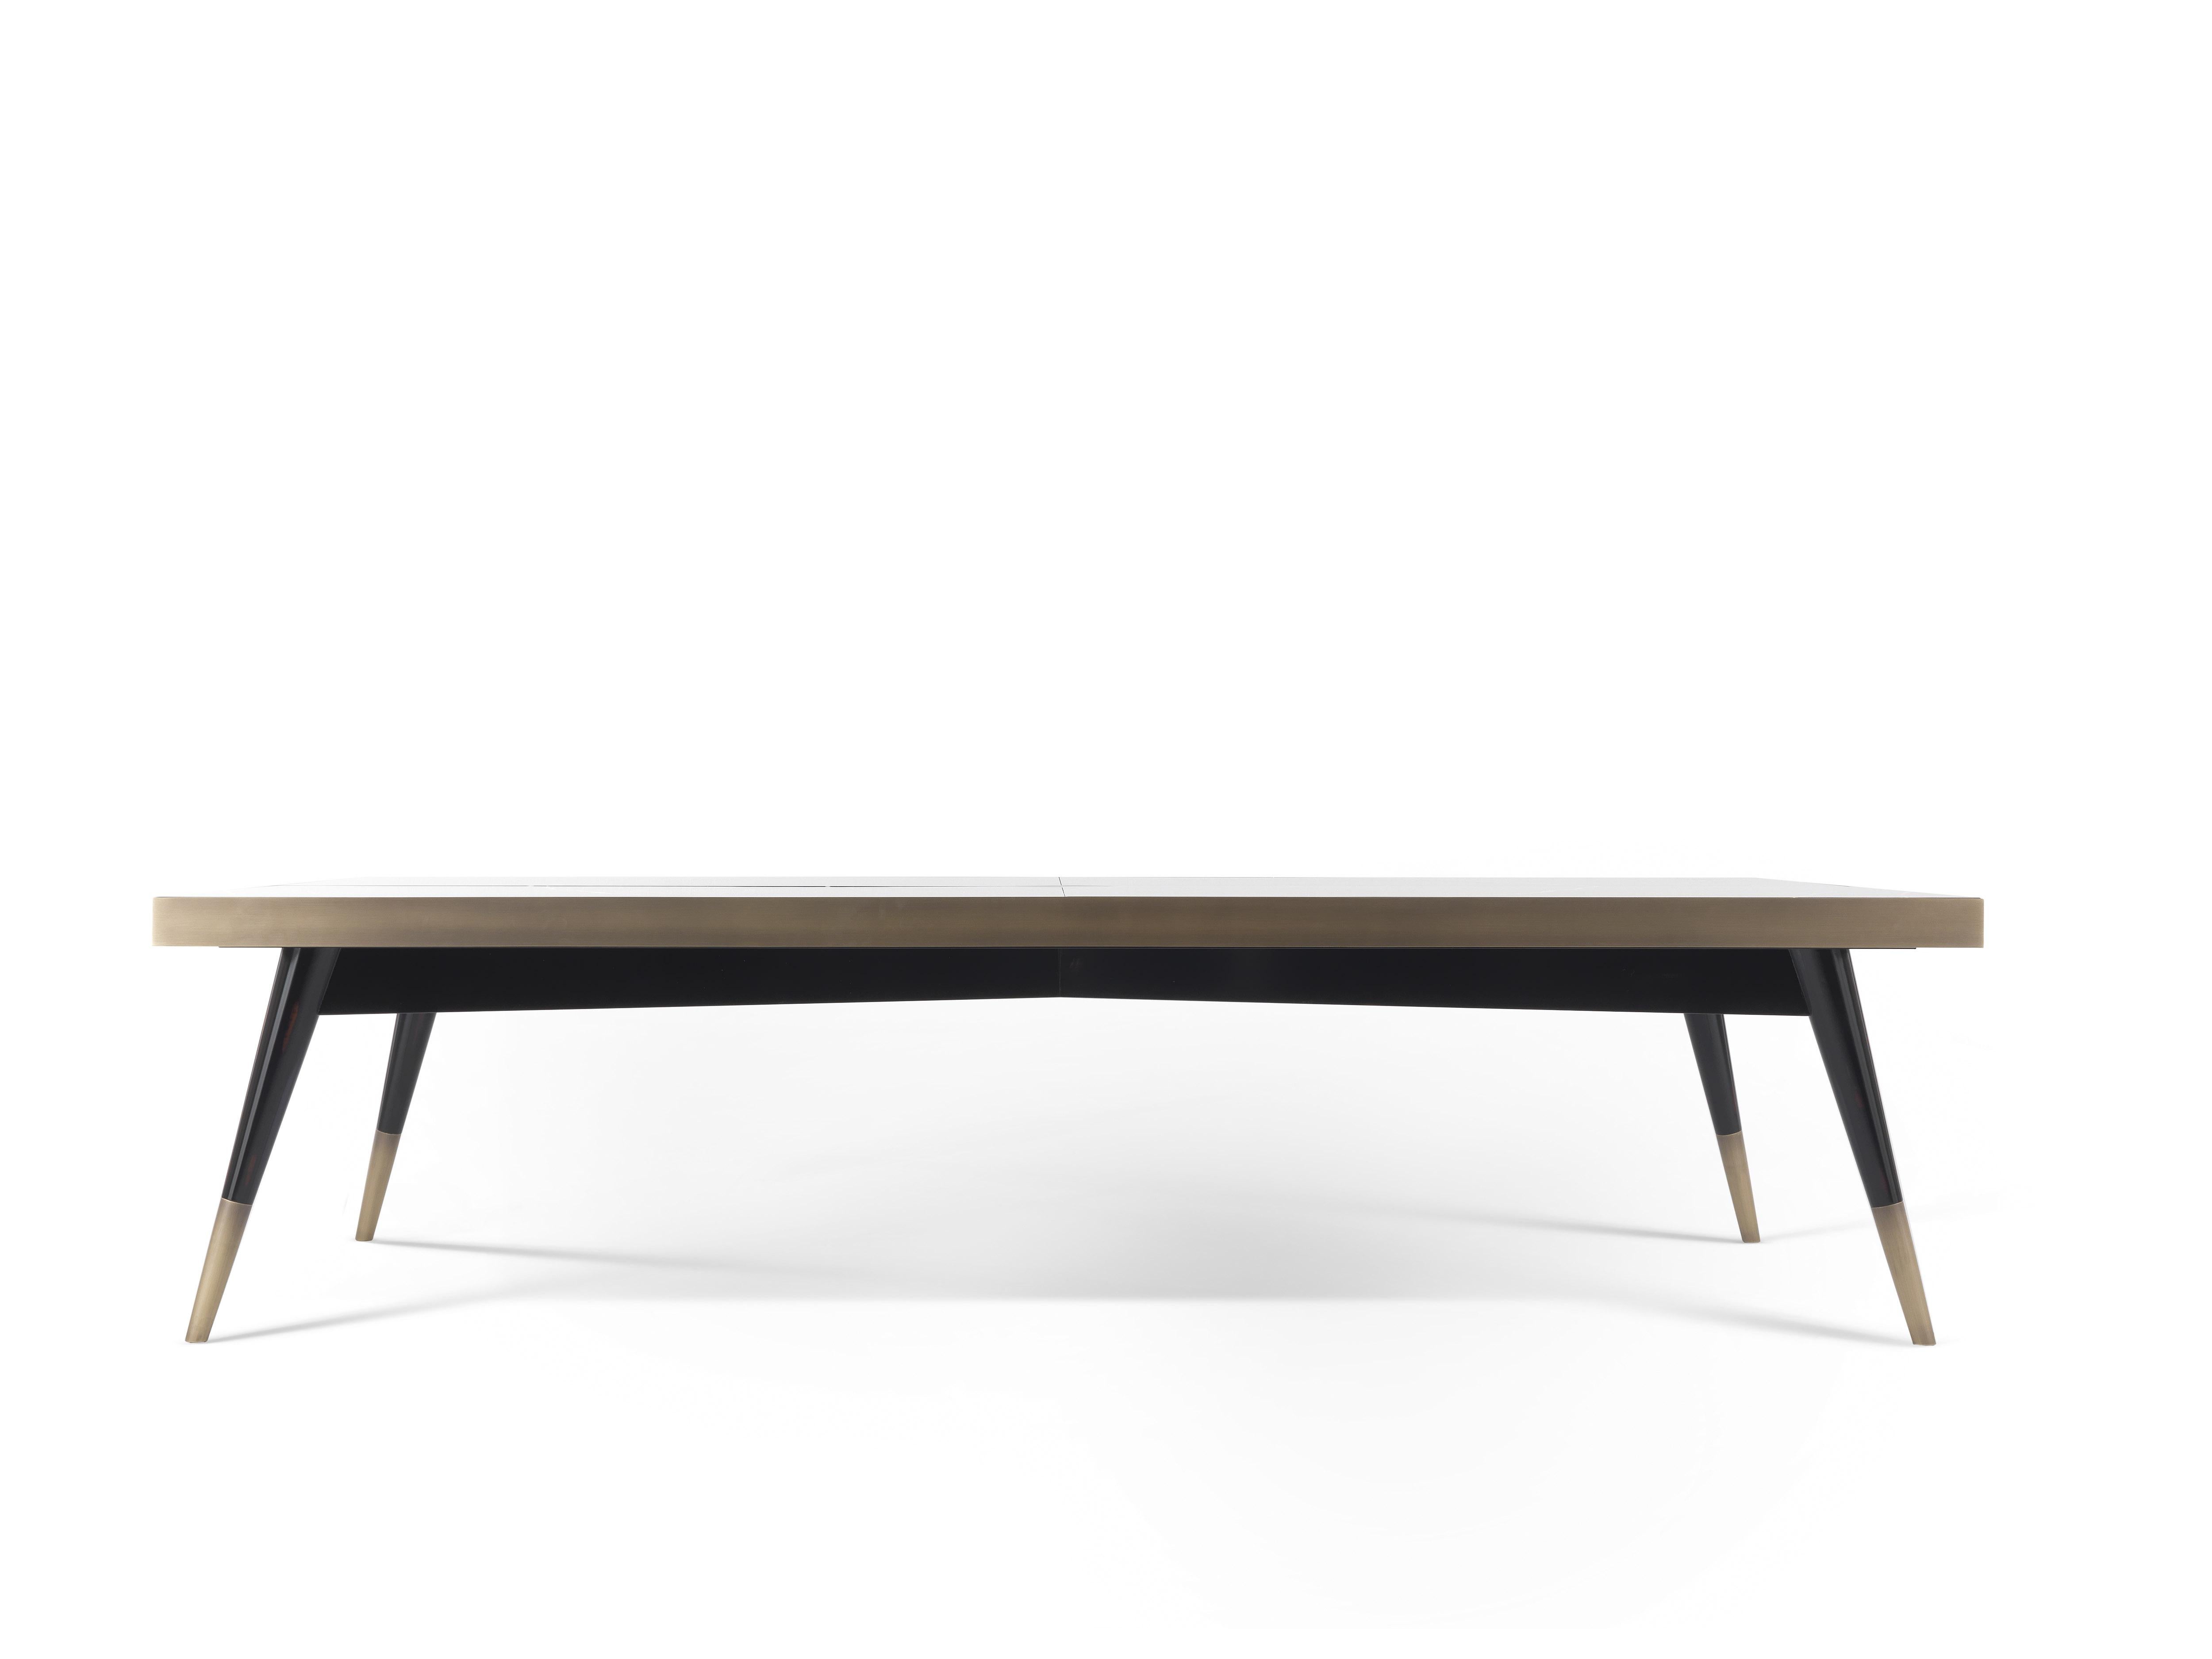 A new version of the Mayfair dining table, presented this year with a rectangular shape. The top in precious Sahara Noir marble presents a central brass rhombus from which the subdivision of the mirrored marbles originates. The slim legs, with a